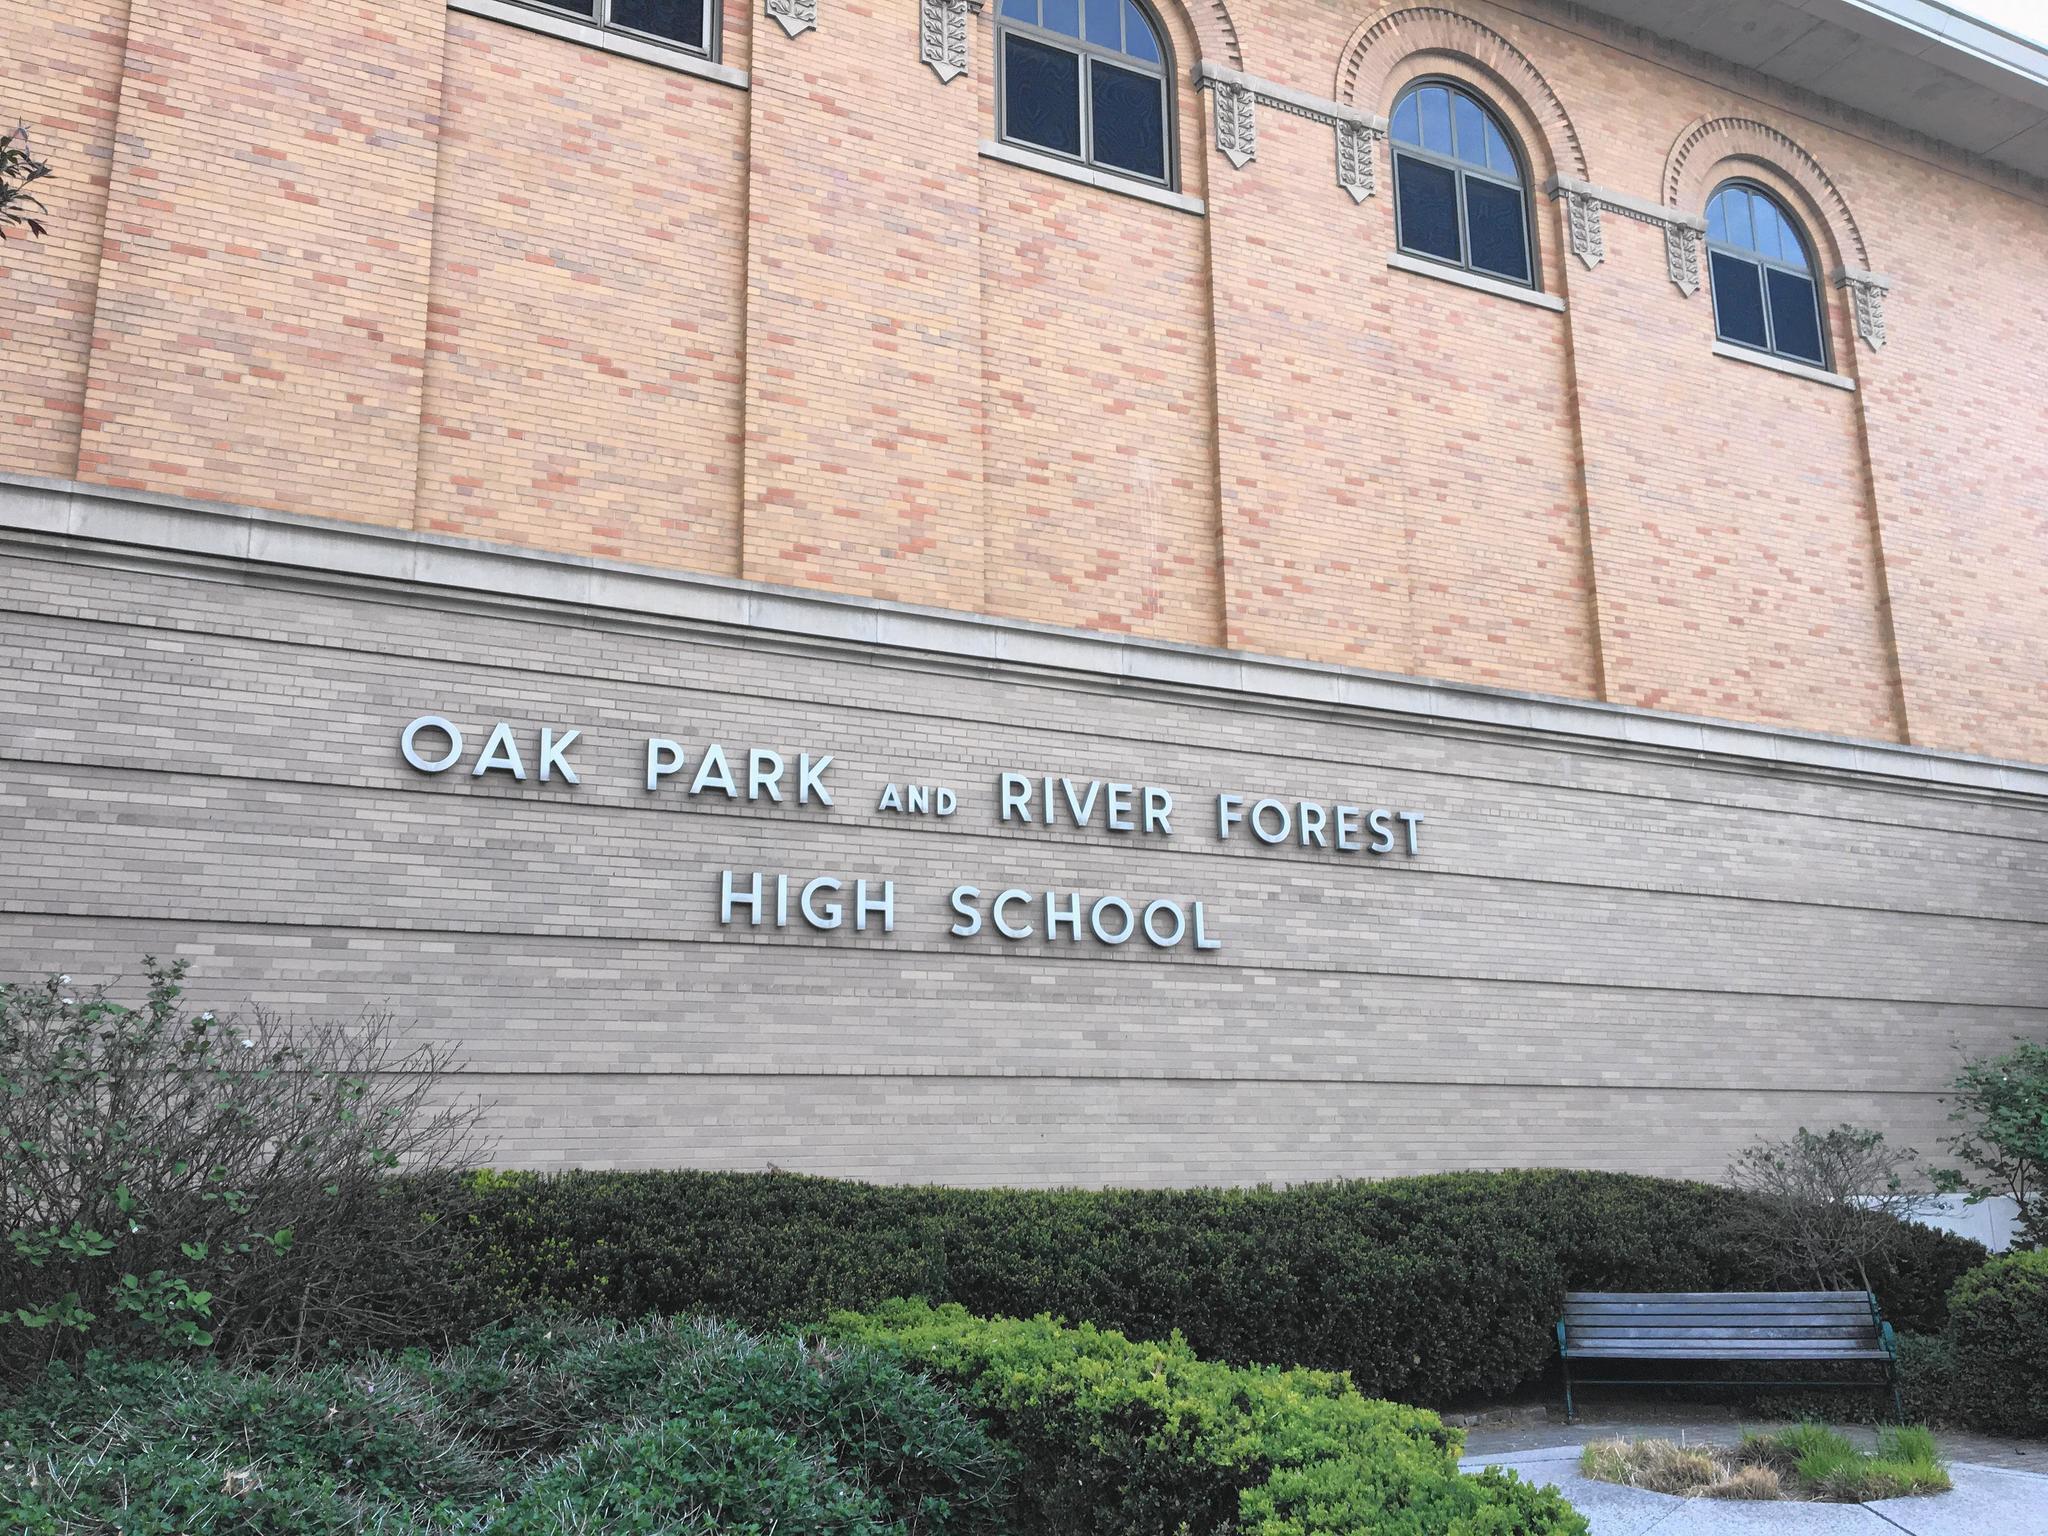 Wednesday morning 'soft lockdown' lifted after nearly 2 hours at OPRF High School